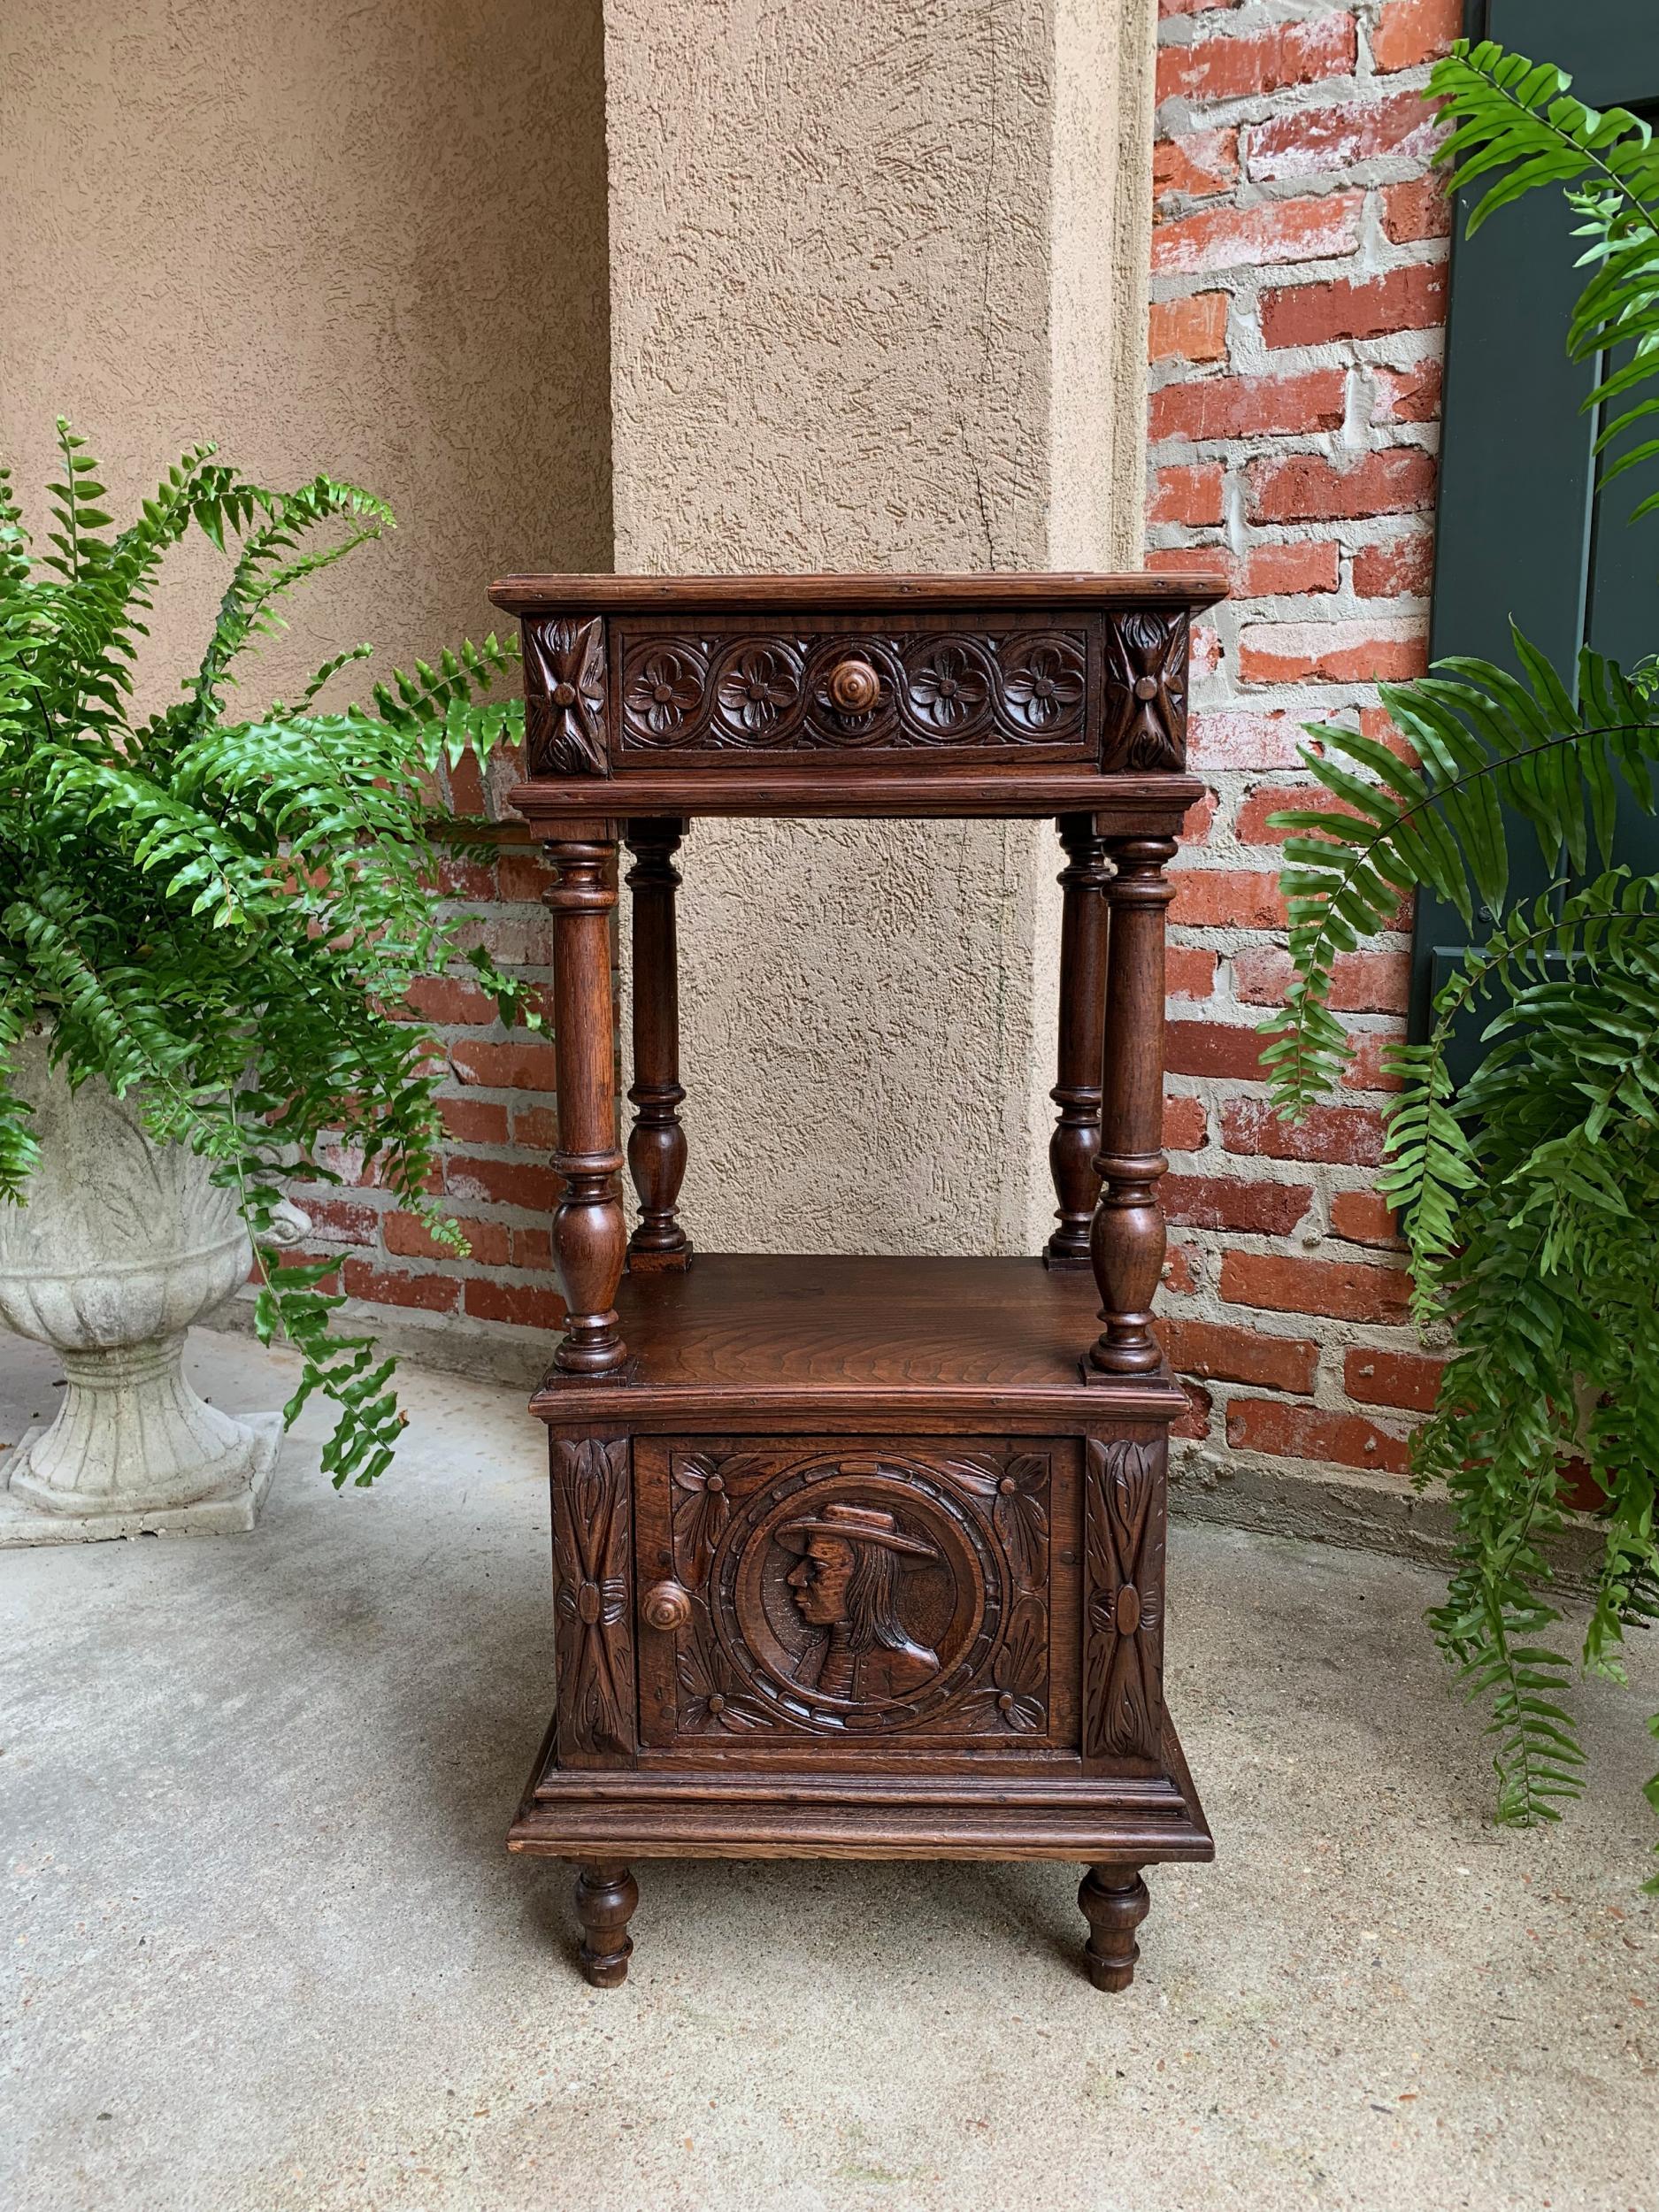 Antique French Nightstand End Table Brittany Breton Marble Carved Oak Cabinet

~Direct from the Brittany region of France~
~Charming carved oak antique French nightstand or end table~
~Original veined marble inset top above the carved front